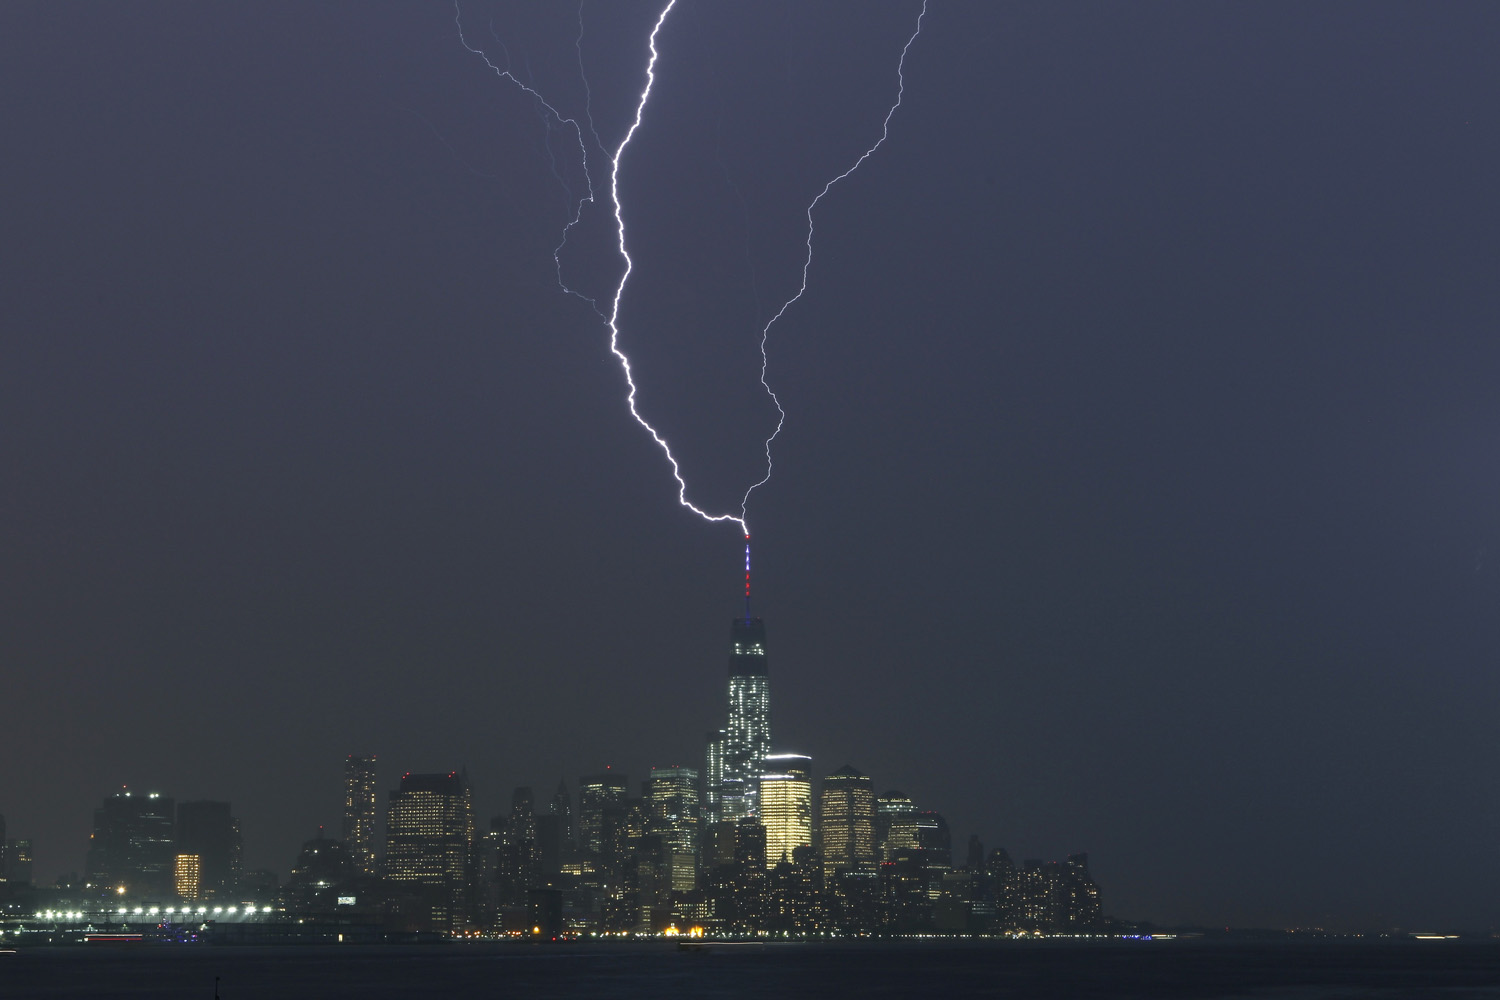 Two bolts of lightning hit the antenna on top of One World Trade Center in Lower Manhattan as an electrical storm moves over New York City on May 23, 2014.